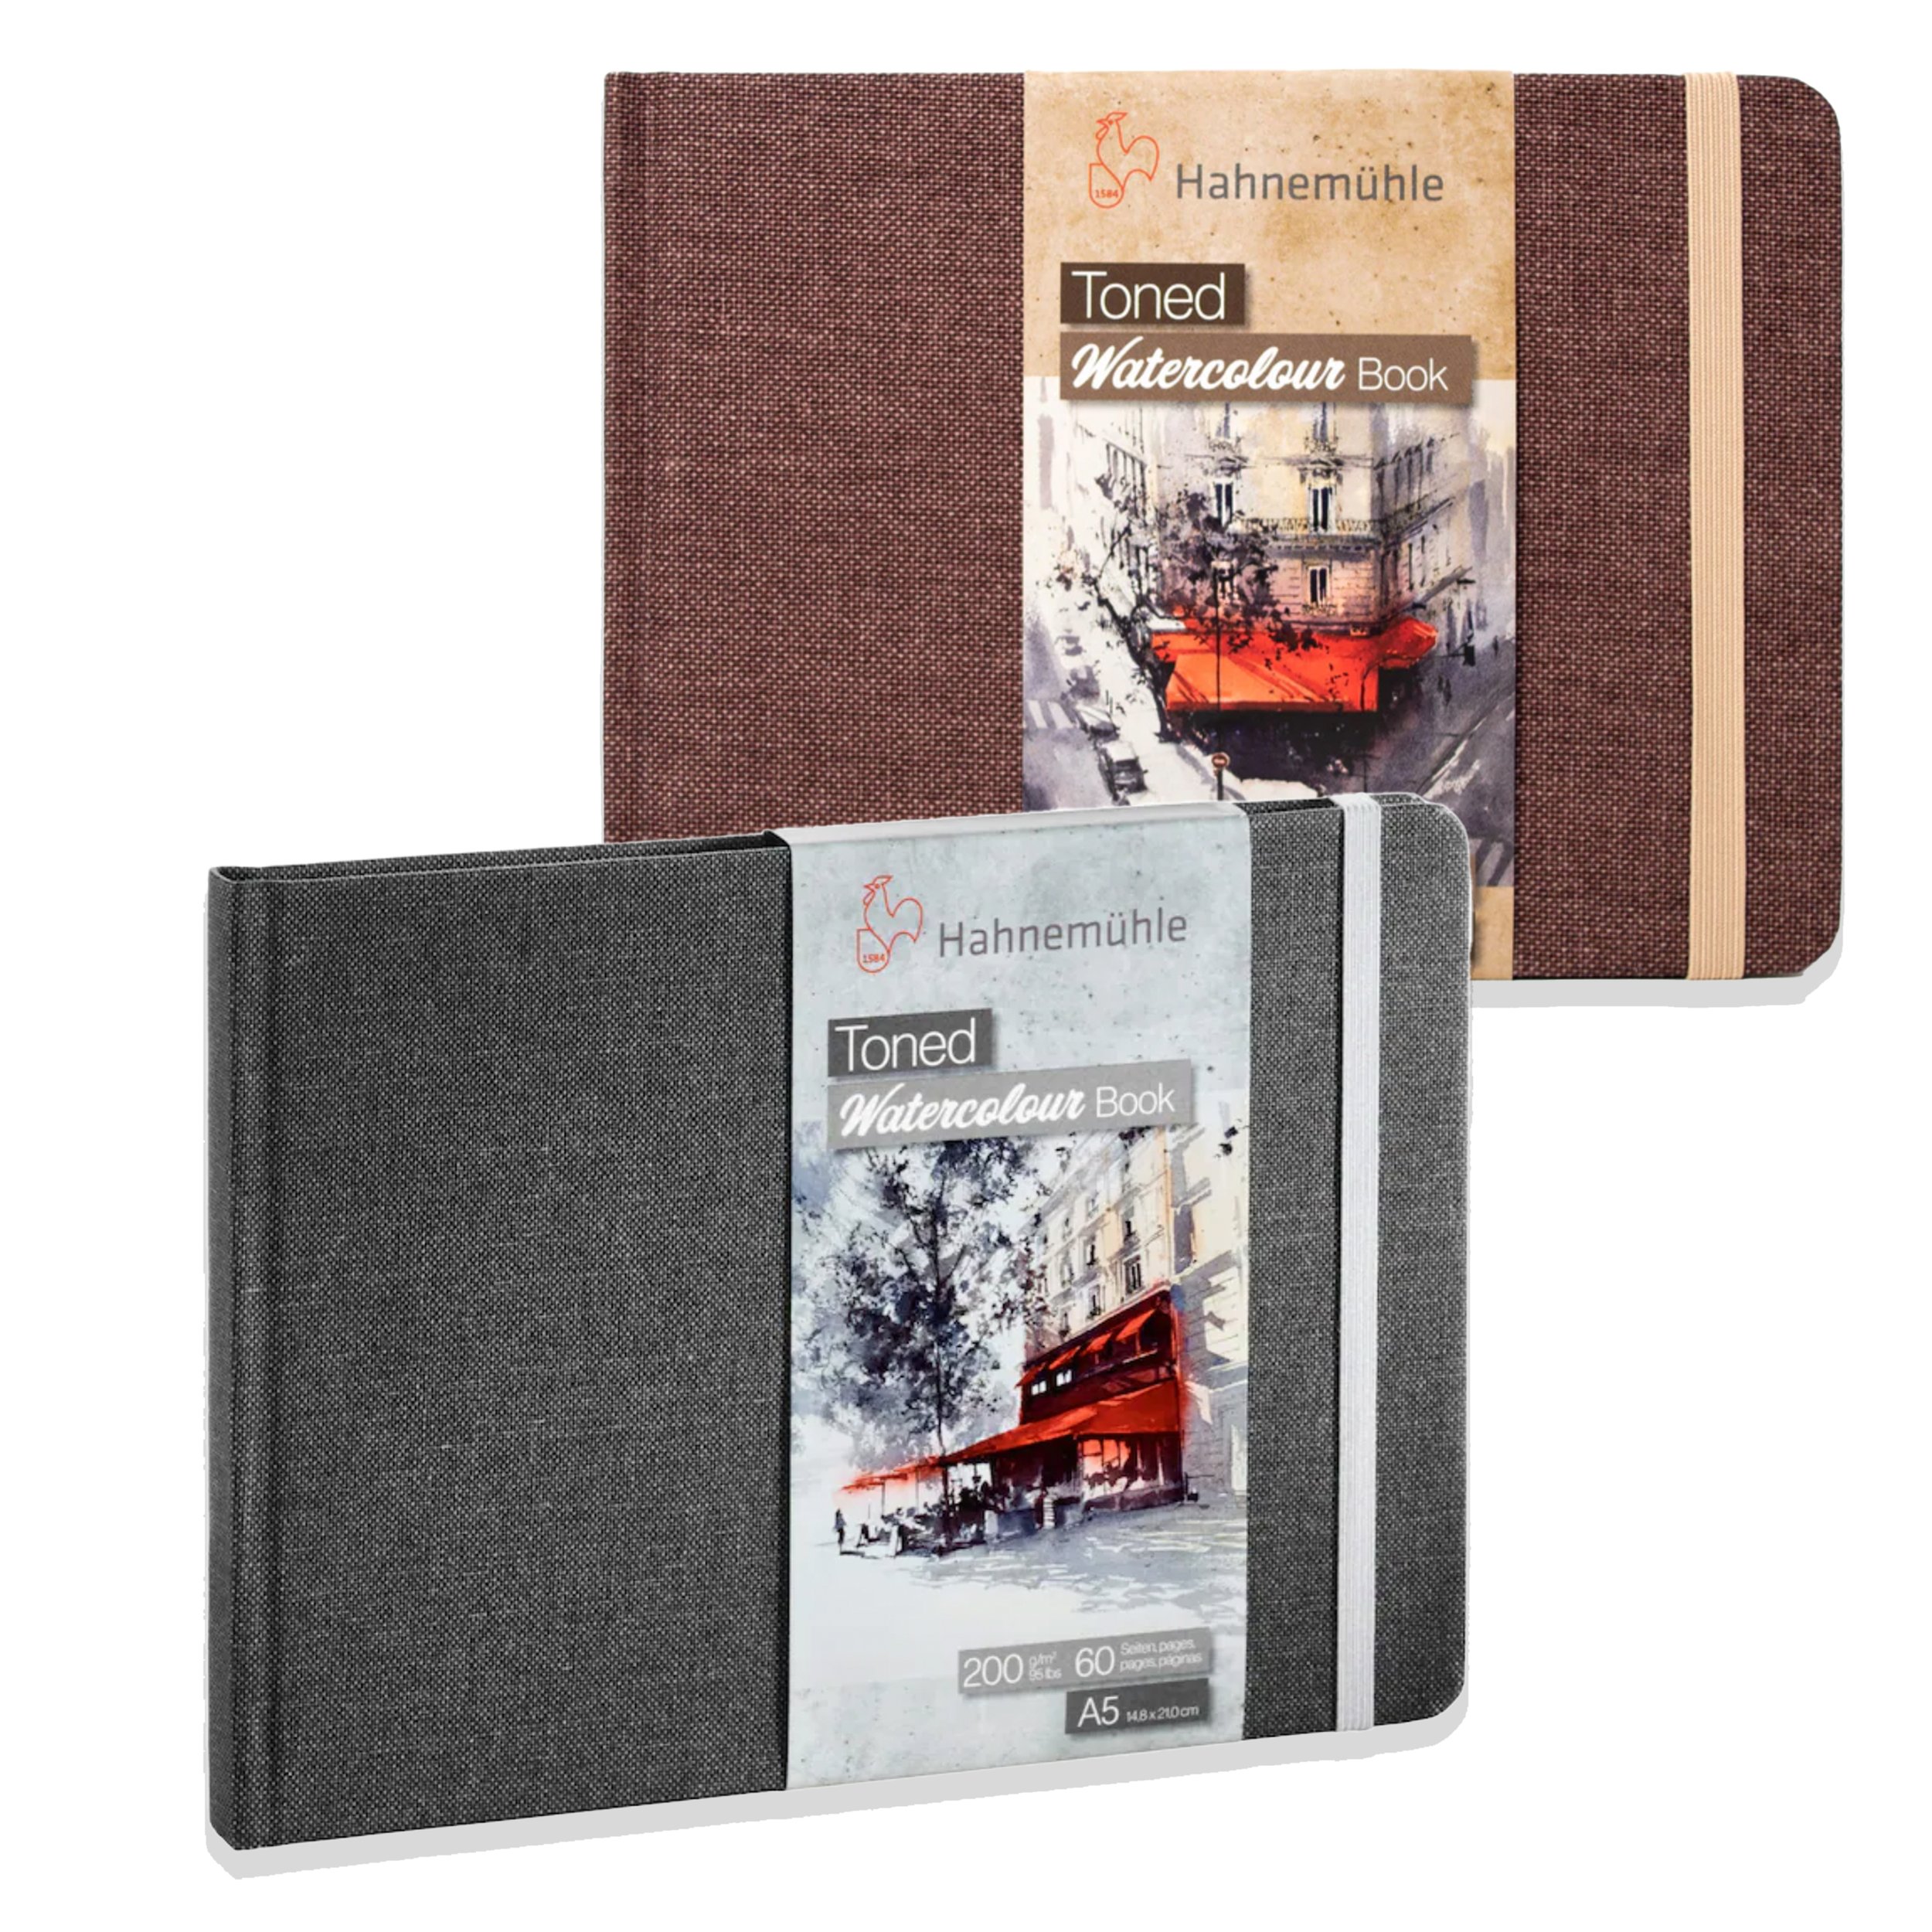 Hahnemuhle Toned Watercolor Books